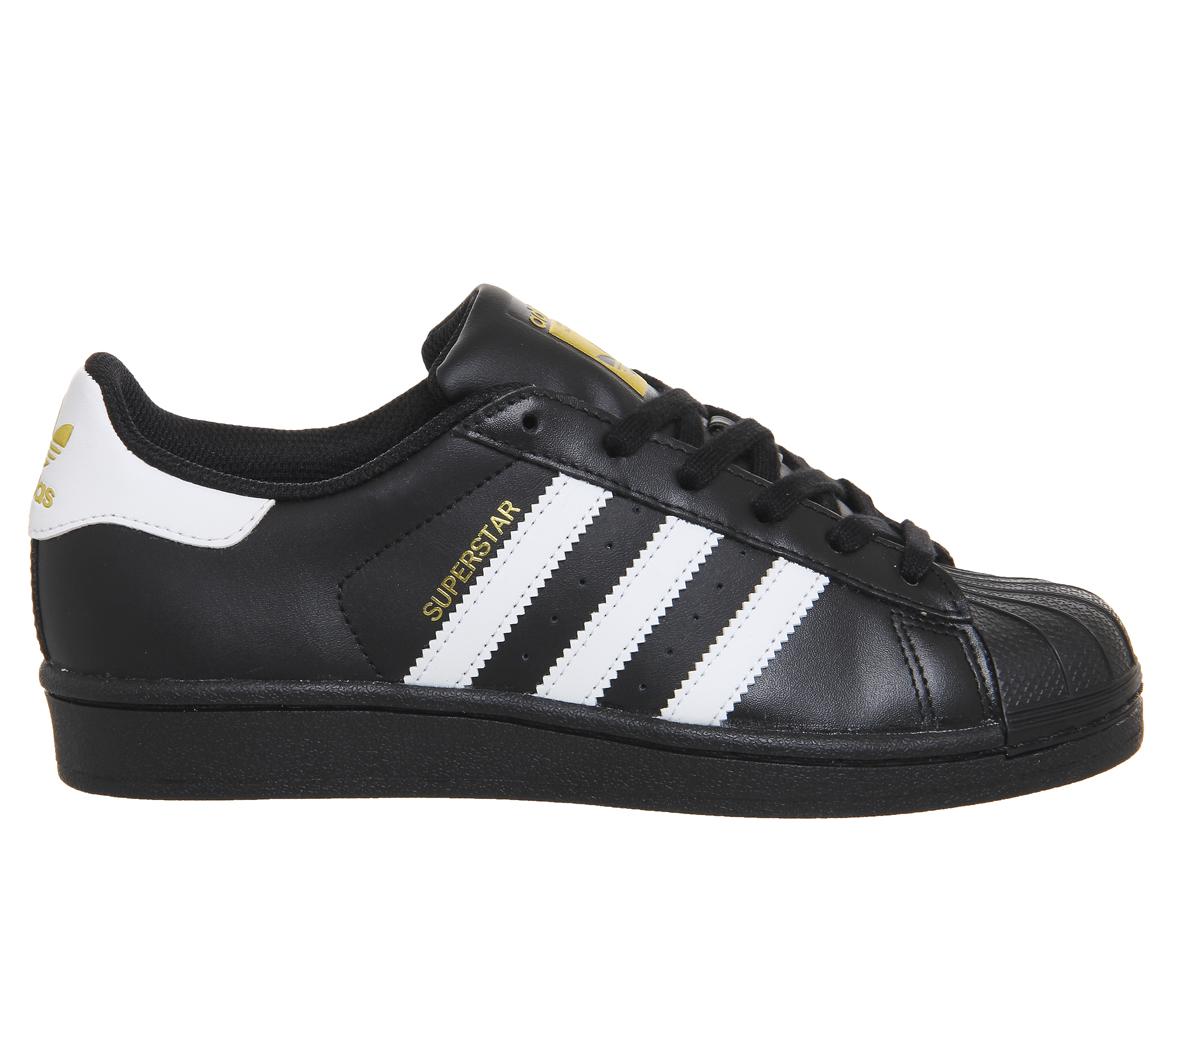 adidas Superstar 1 Black White Foundation - His trainers